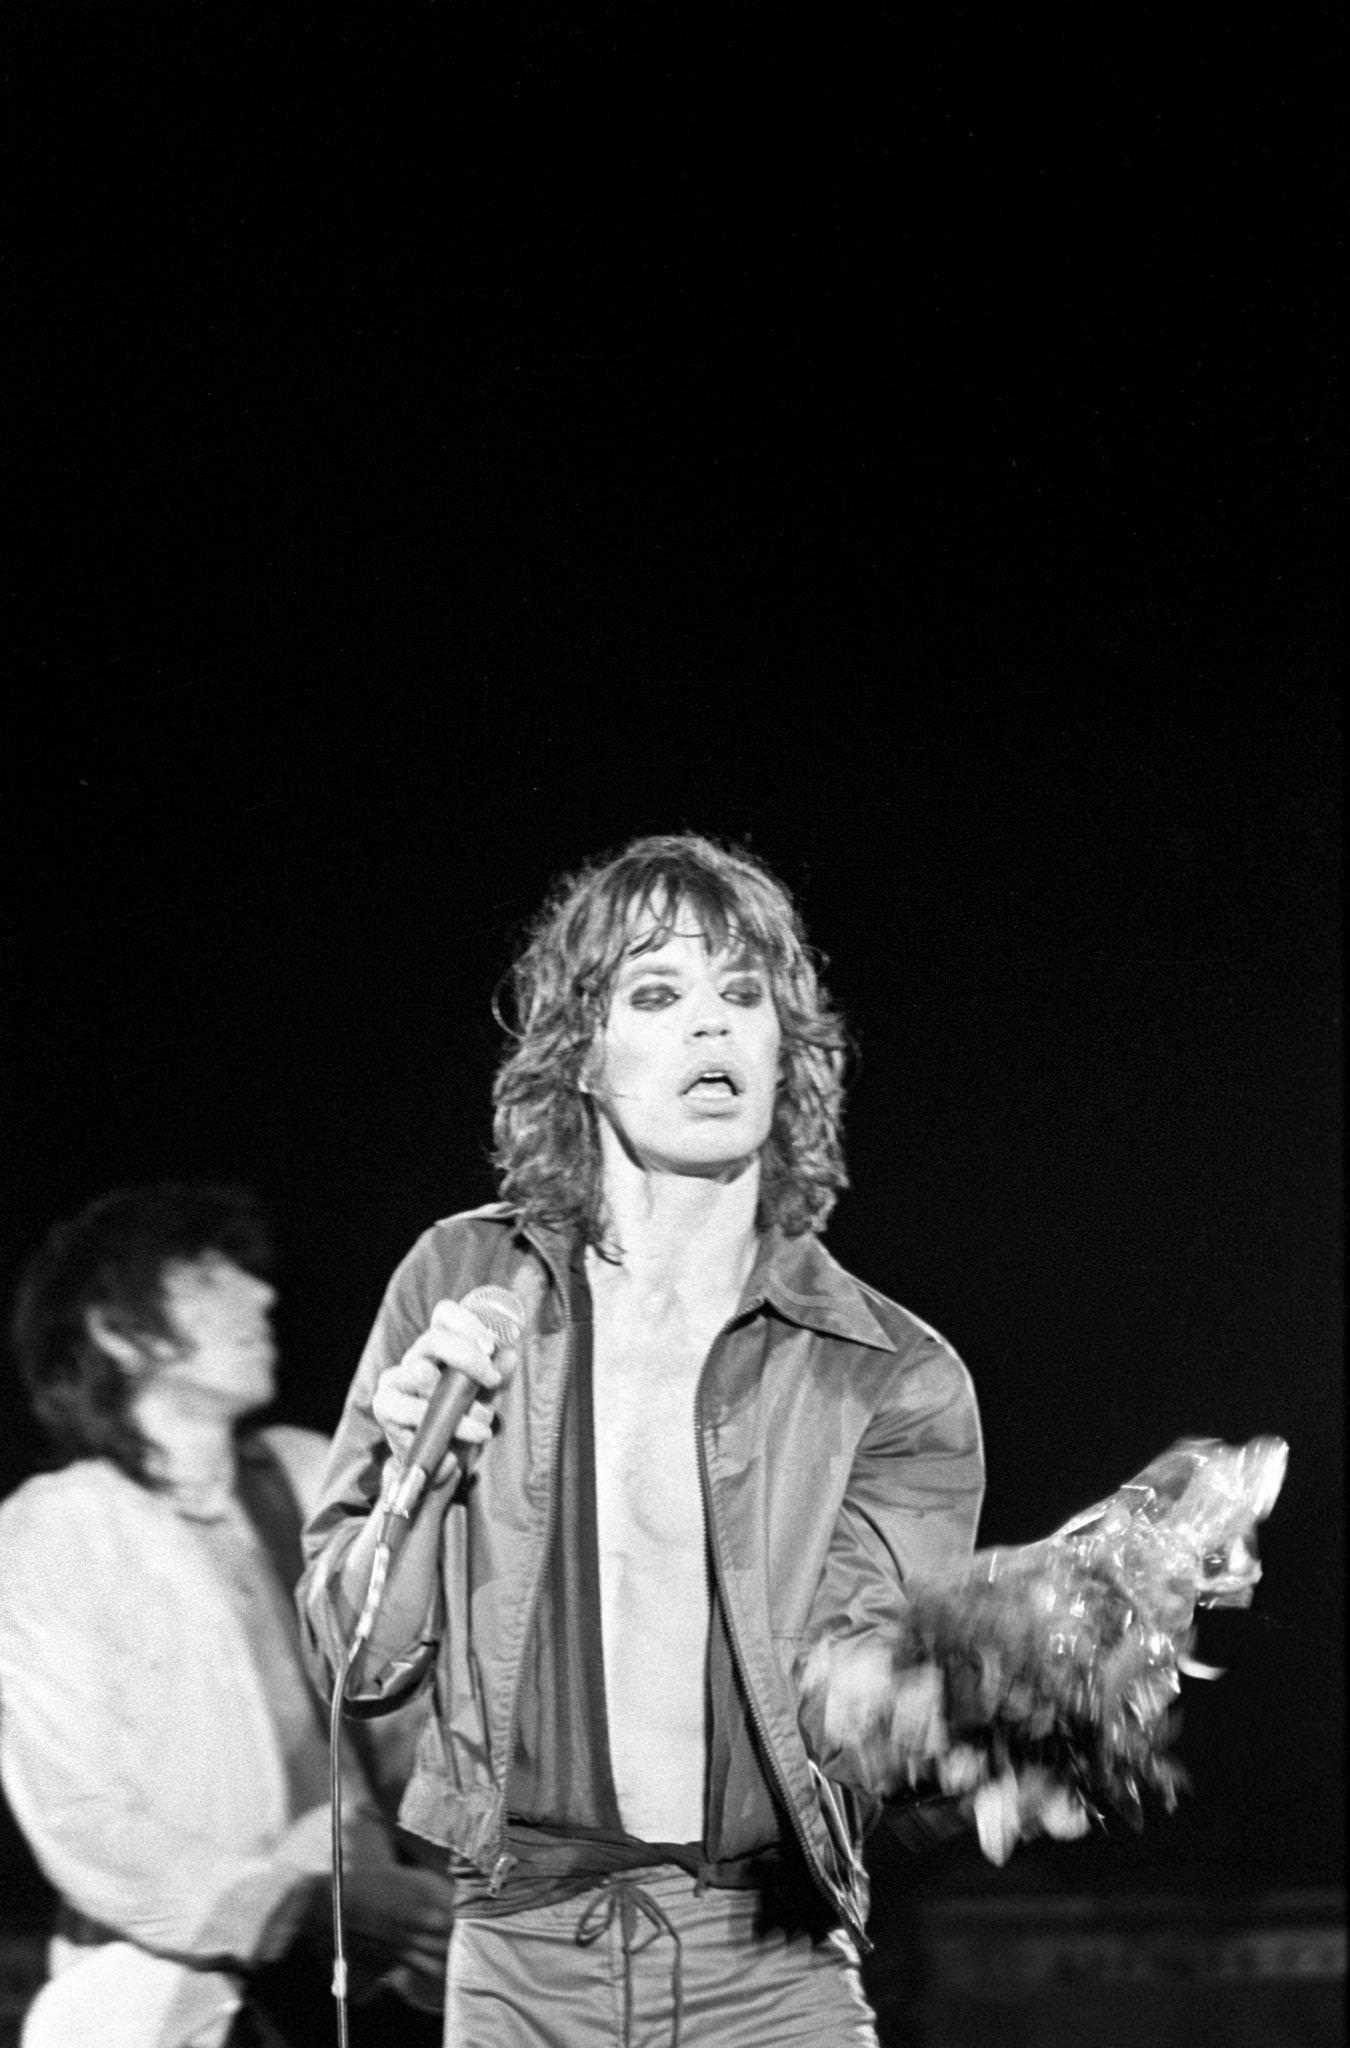 Mick Jagger performs with Keith Richards at Madison Square Garden during the band's 'Tour of America ' 75" on June 25, 1975, in New York, New York.